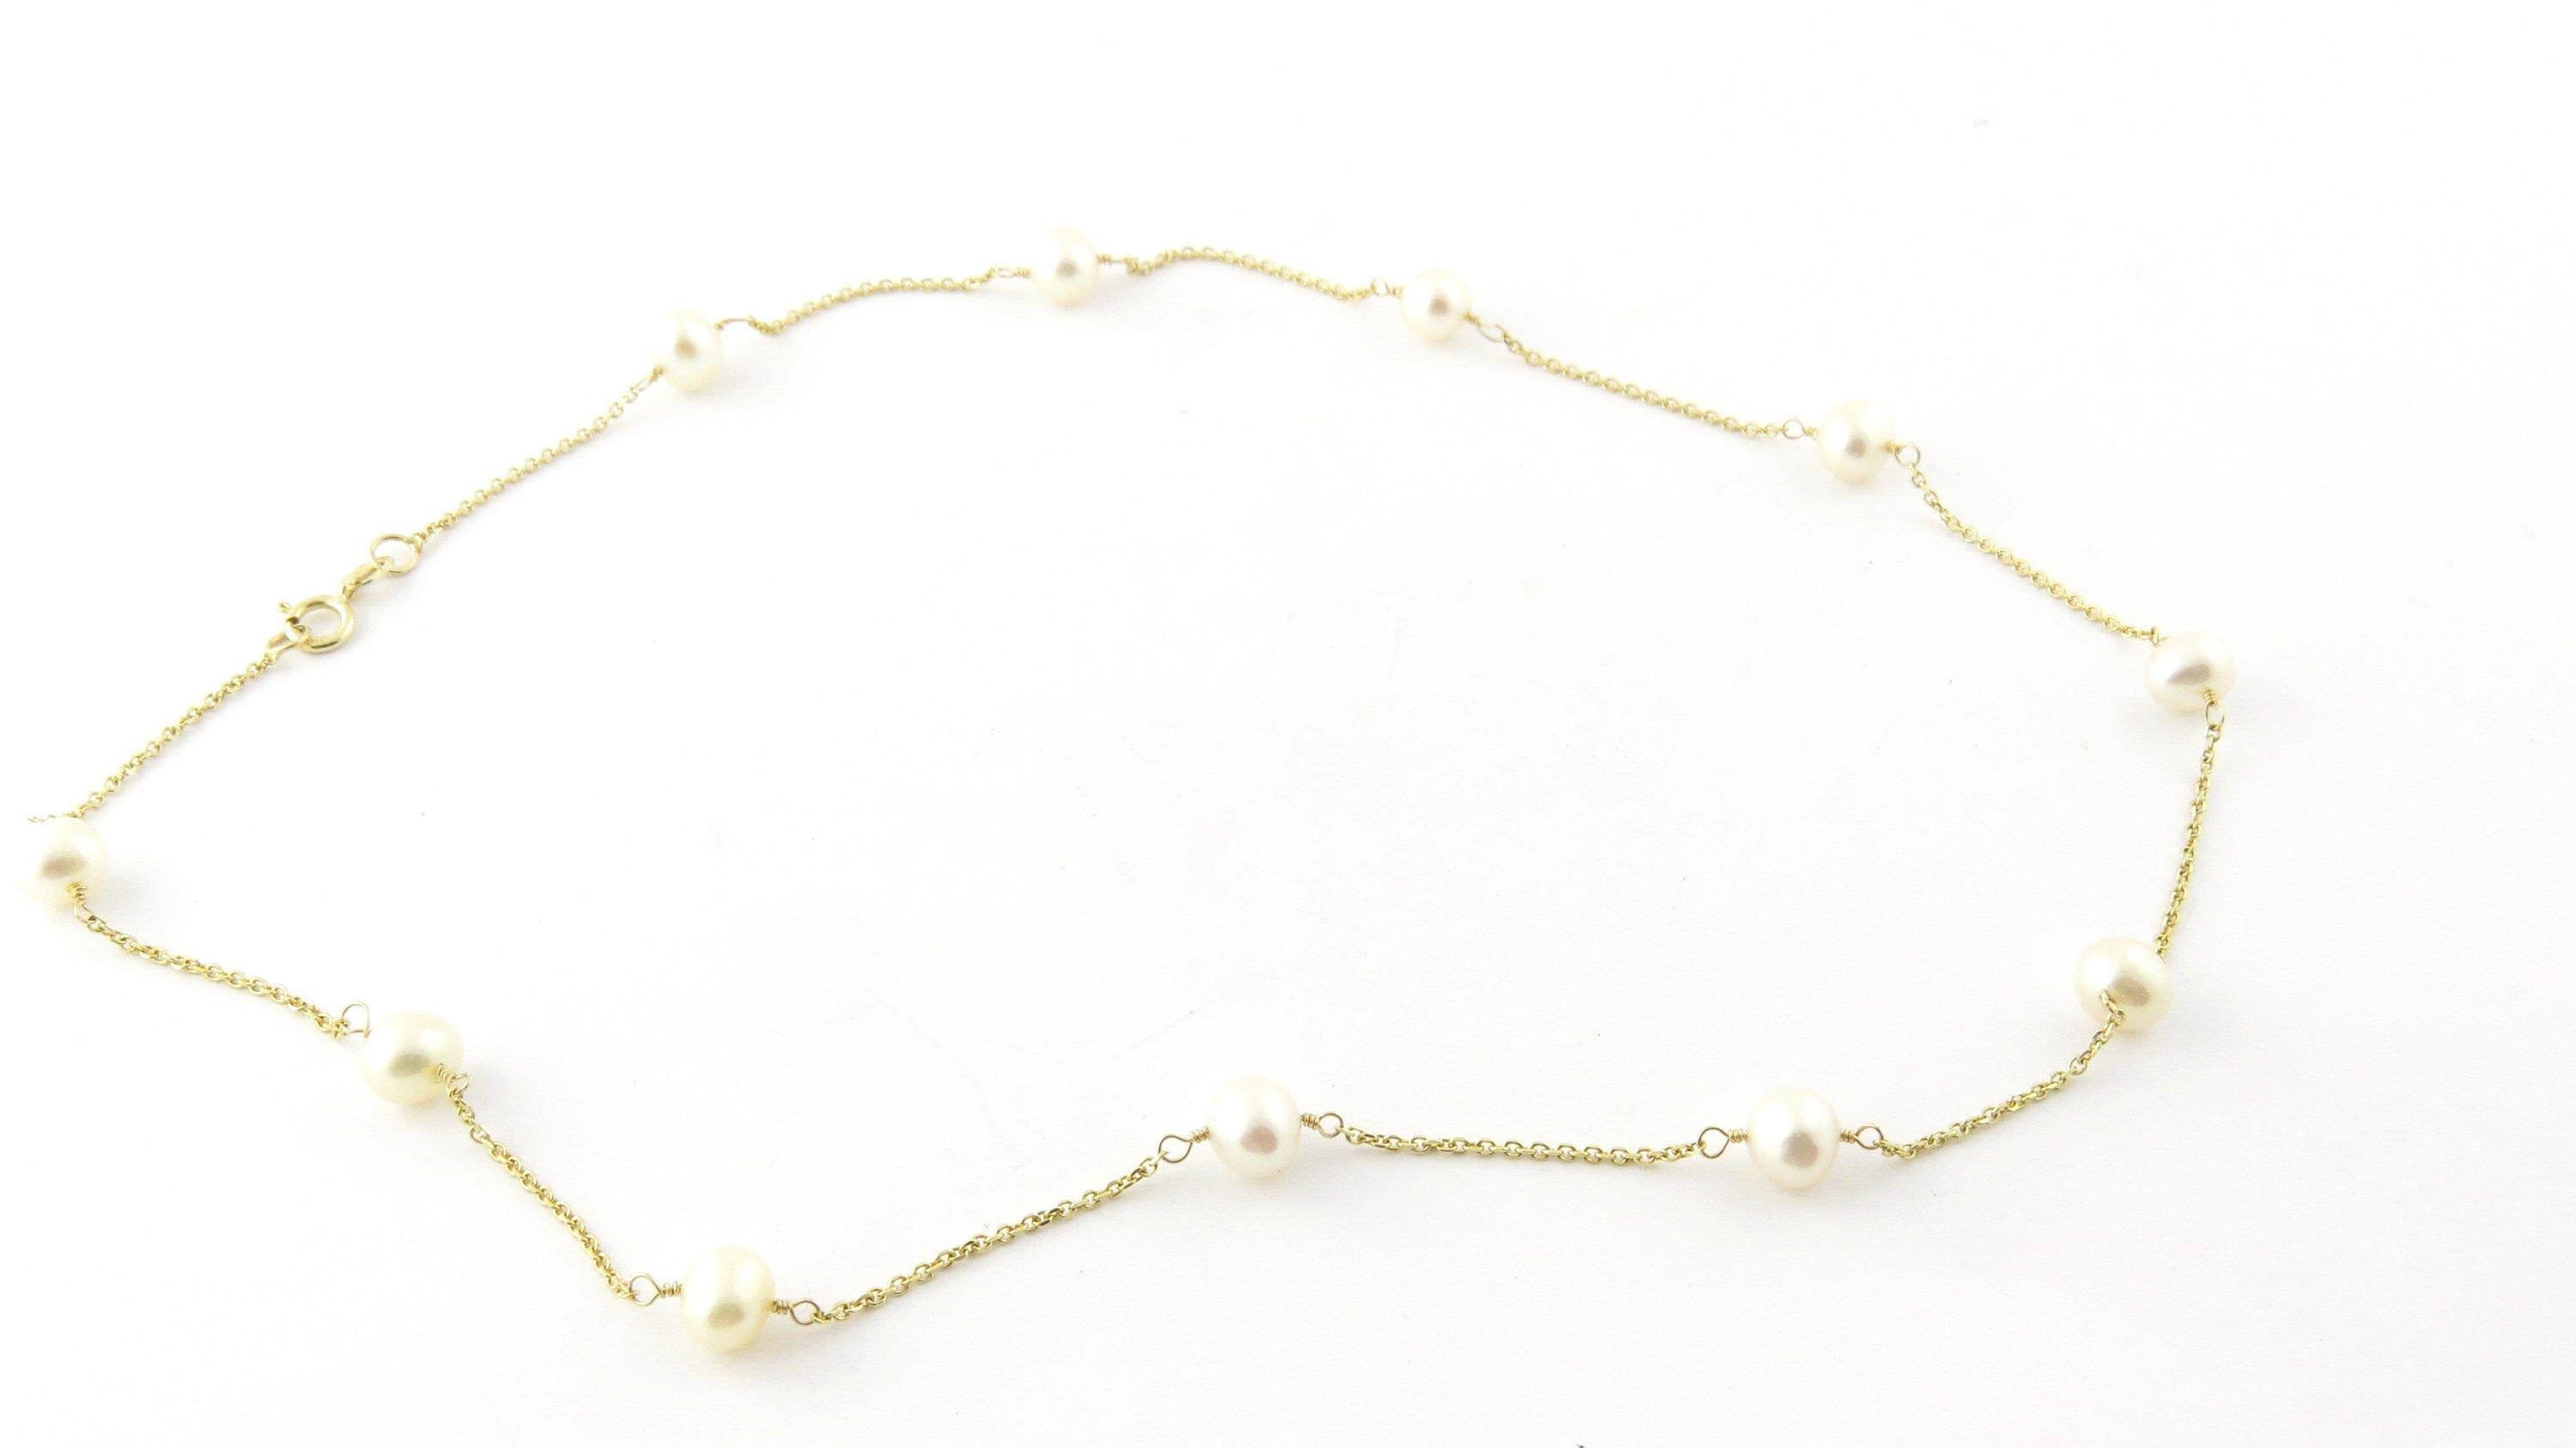 Vintage 14 Karat Yellow Gold and Pearl Necklace-This stunning necklace features 11 cultured pearls (5-6 mm each) set on a delicate 14K yellow gold necklace. Size: 16 inches Weight: 2.9 dwt. / 4.6 gr. Stamped: 14K Very good condition, professionally